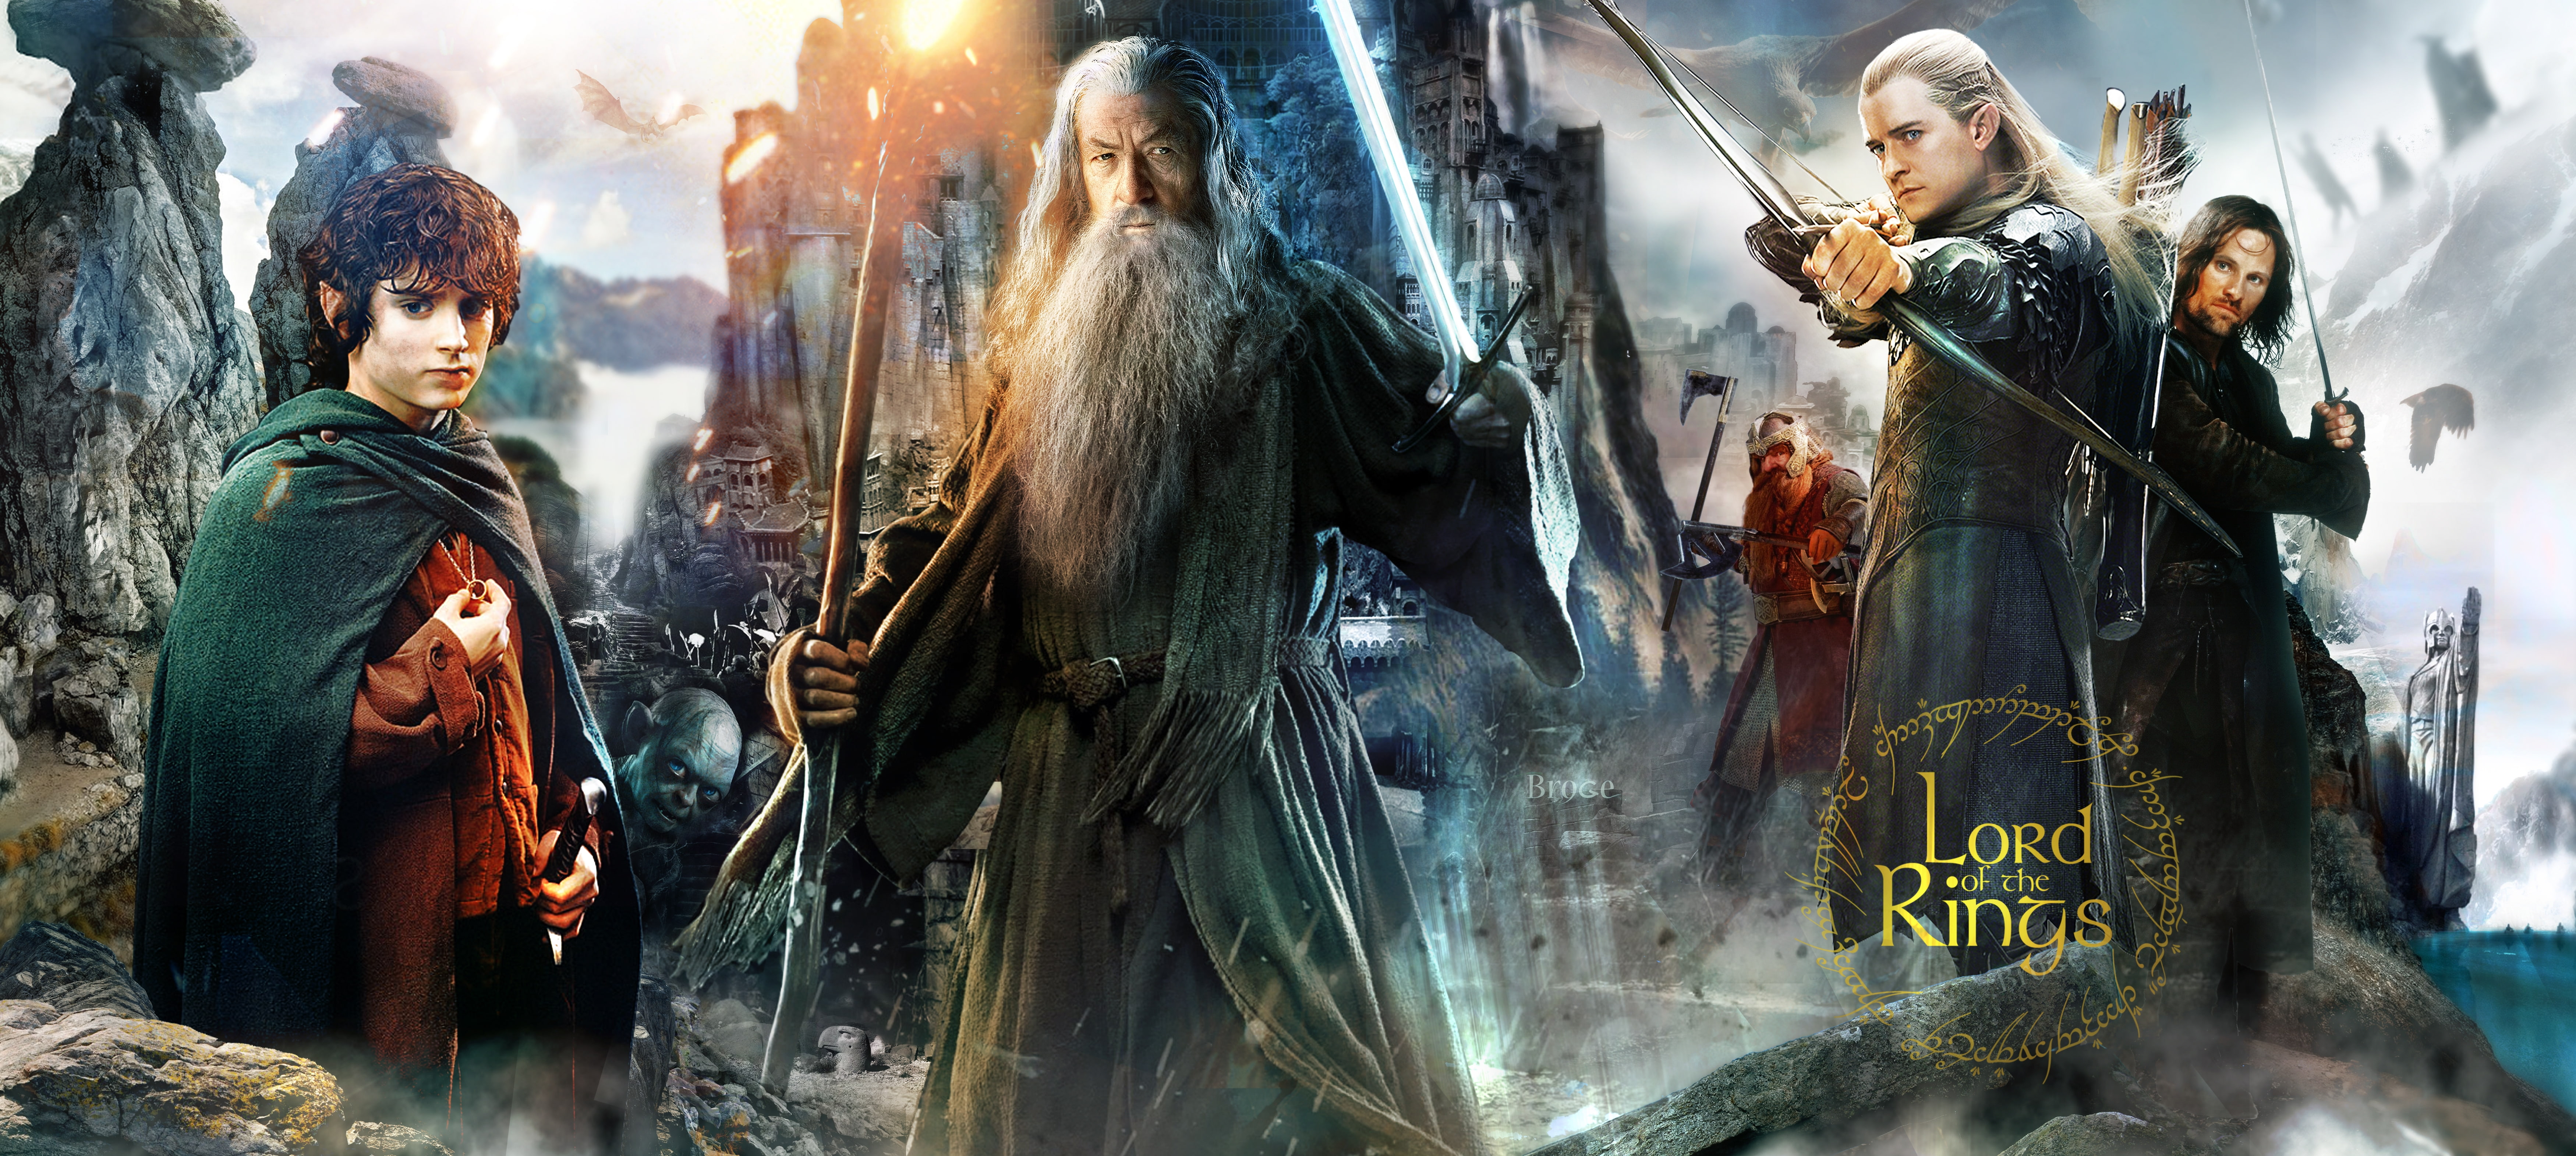 the lord of the rings, gandalf, frodo, legolas, Movies, women